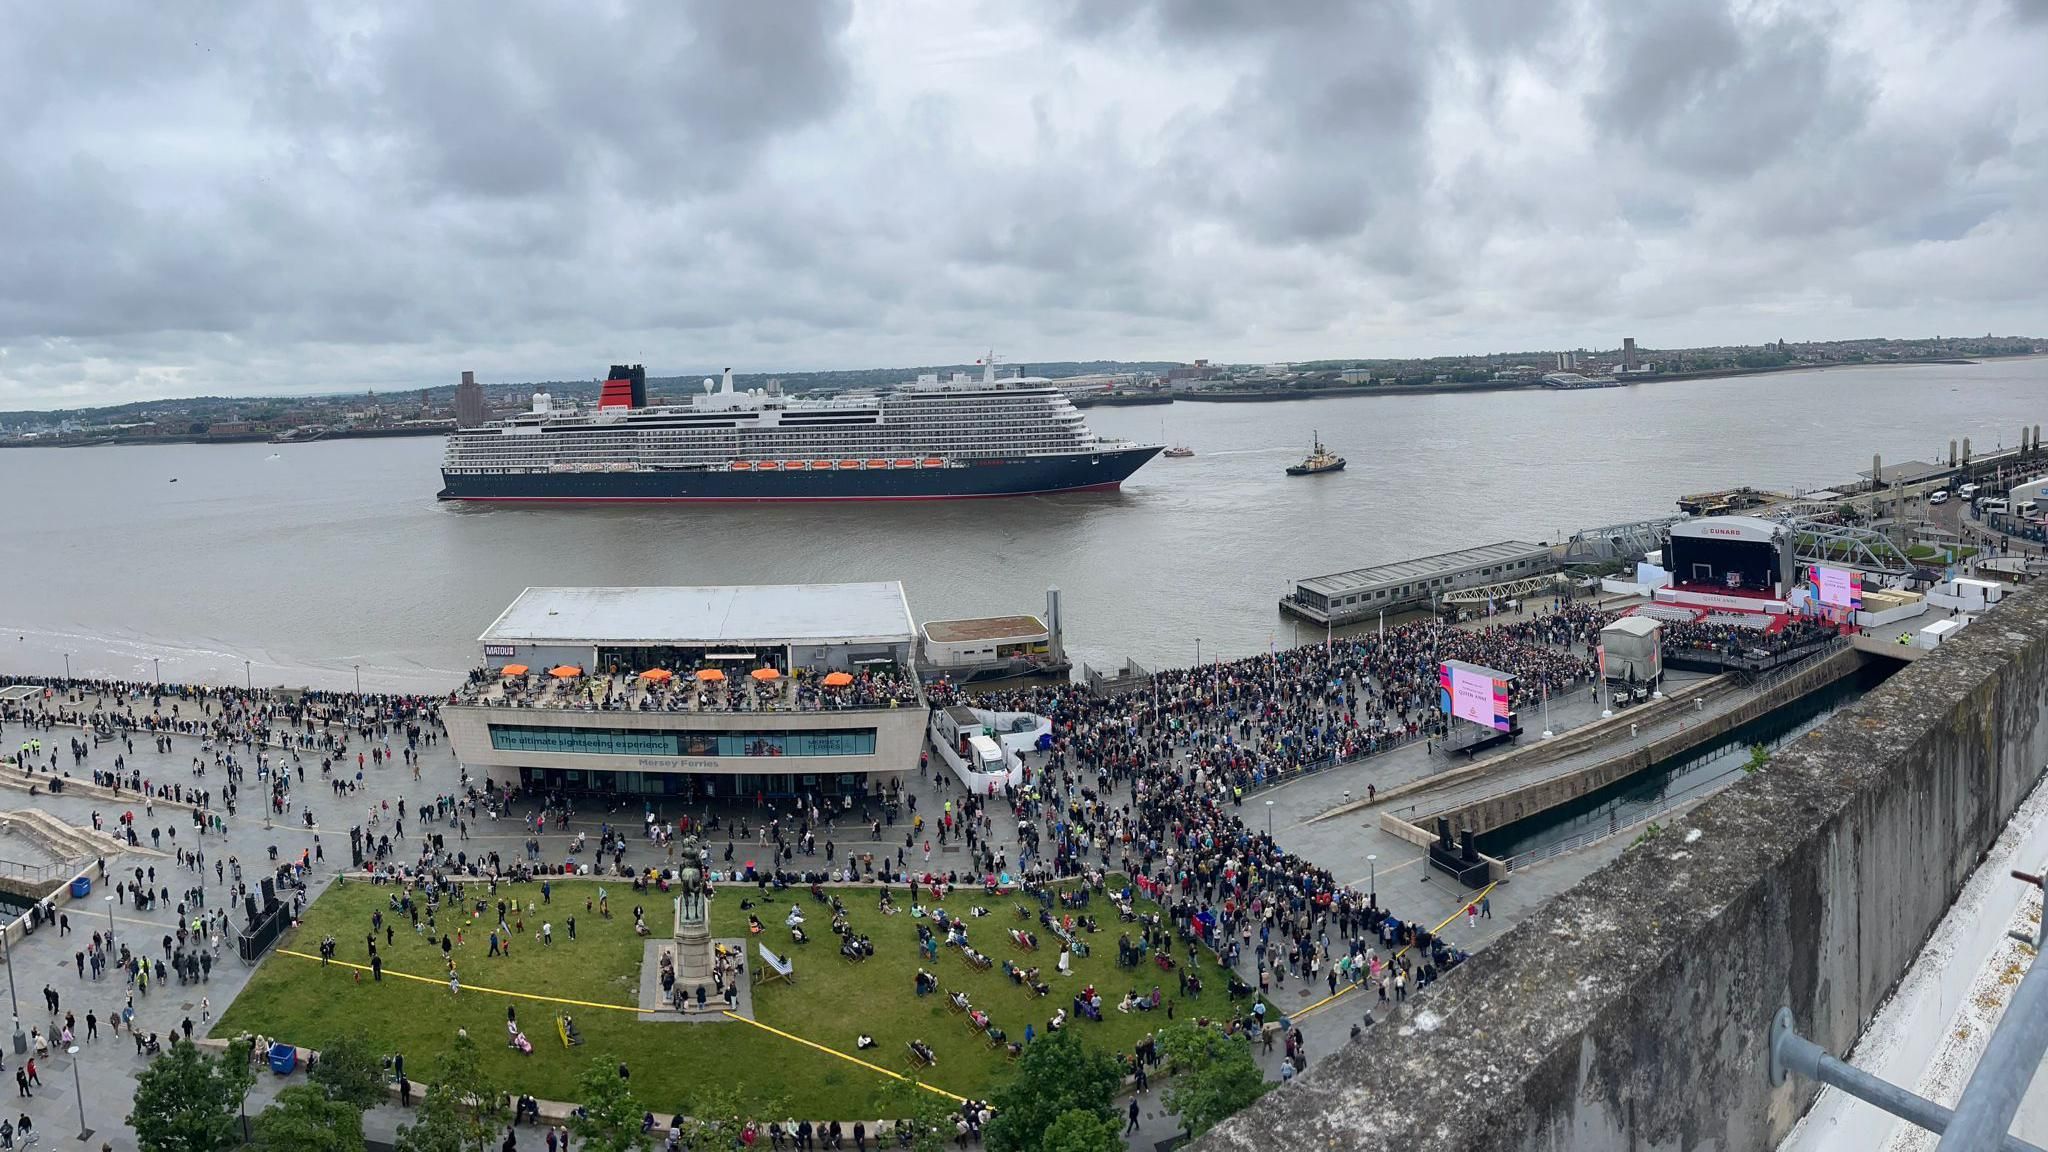 Crowd at Pier Head for Queen Anne naming ceremony